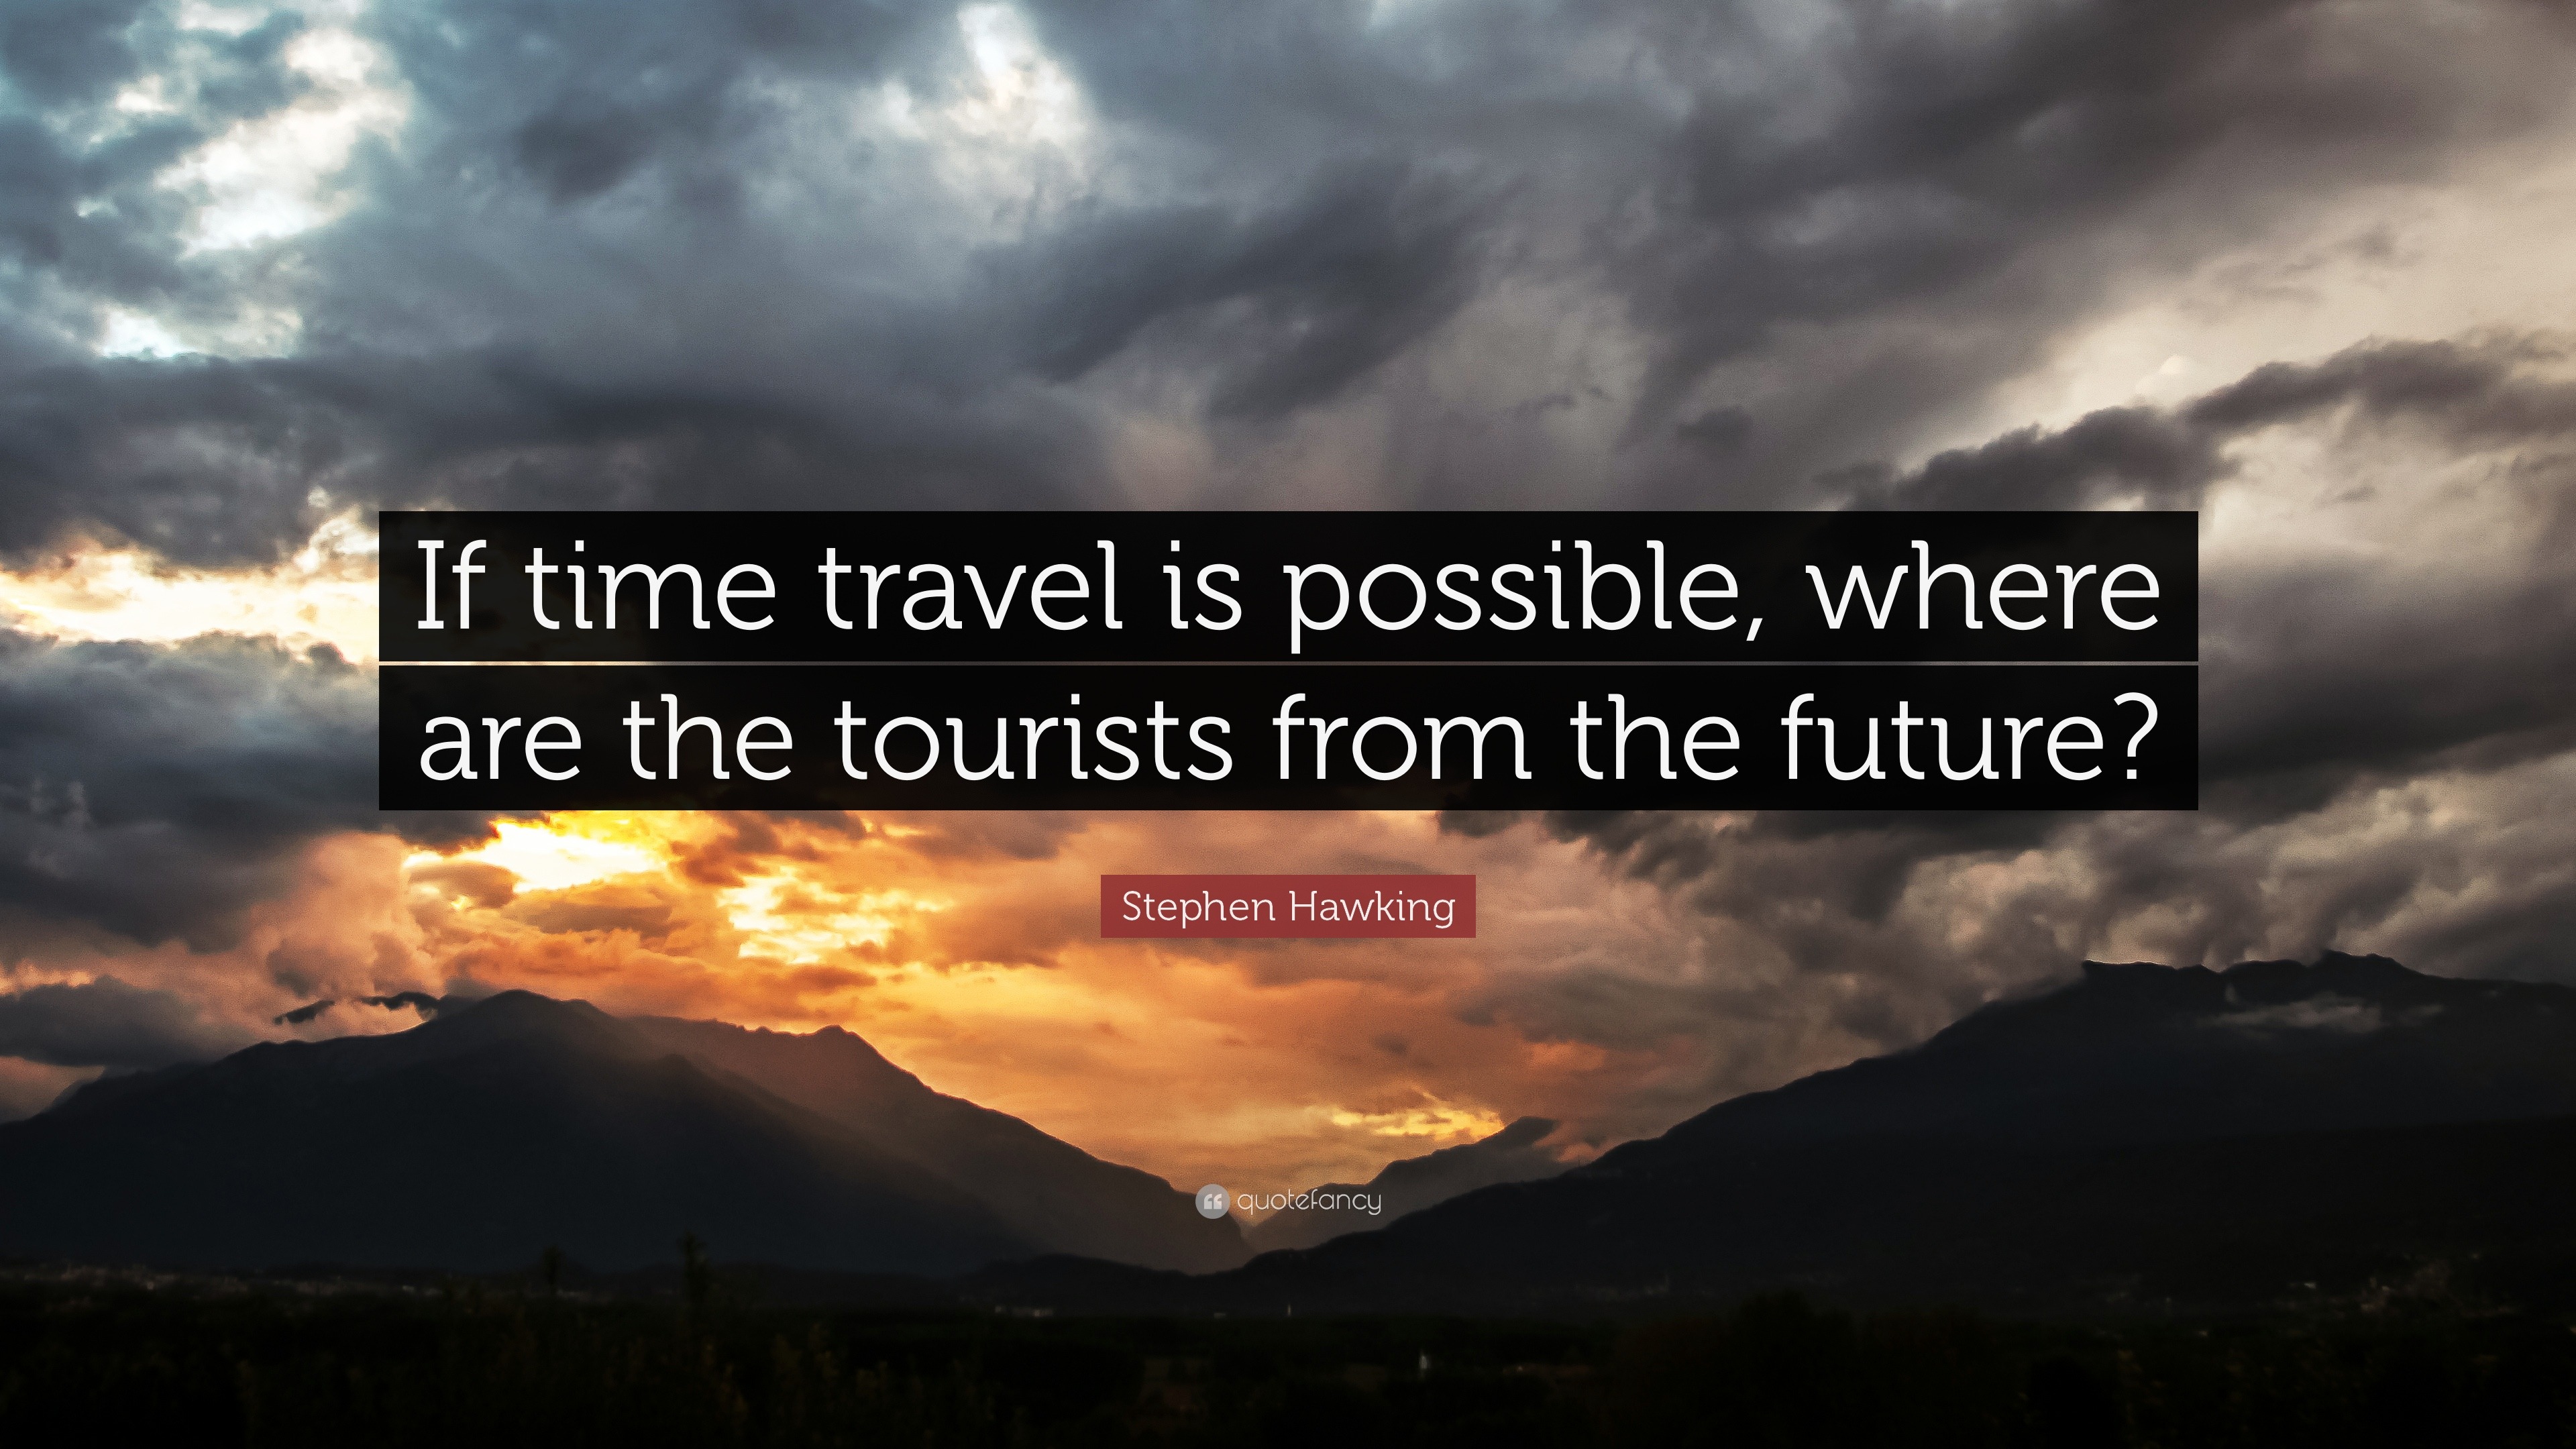 if time travel was possible where would you go